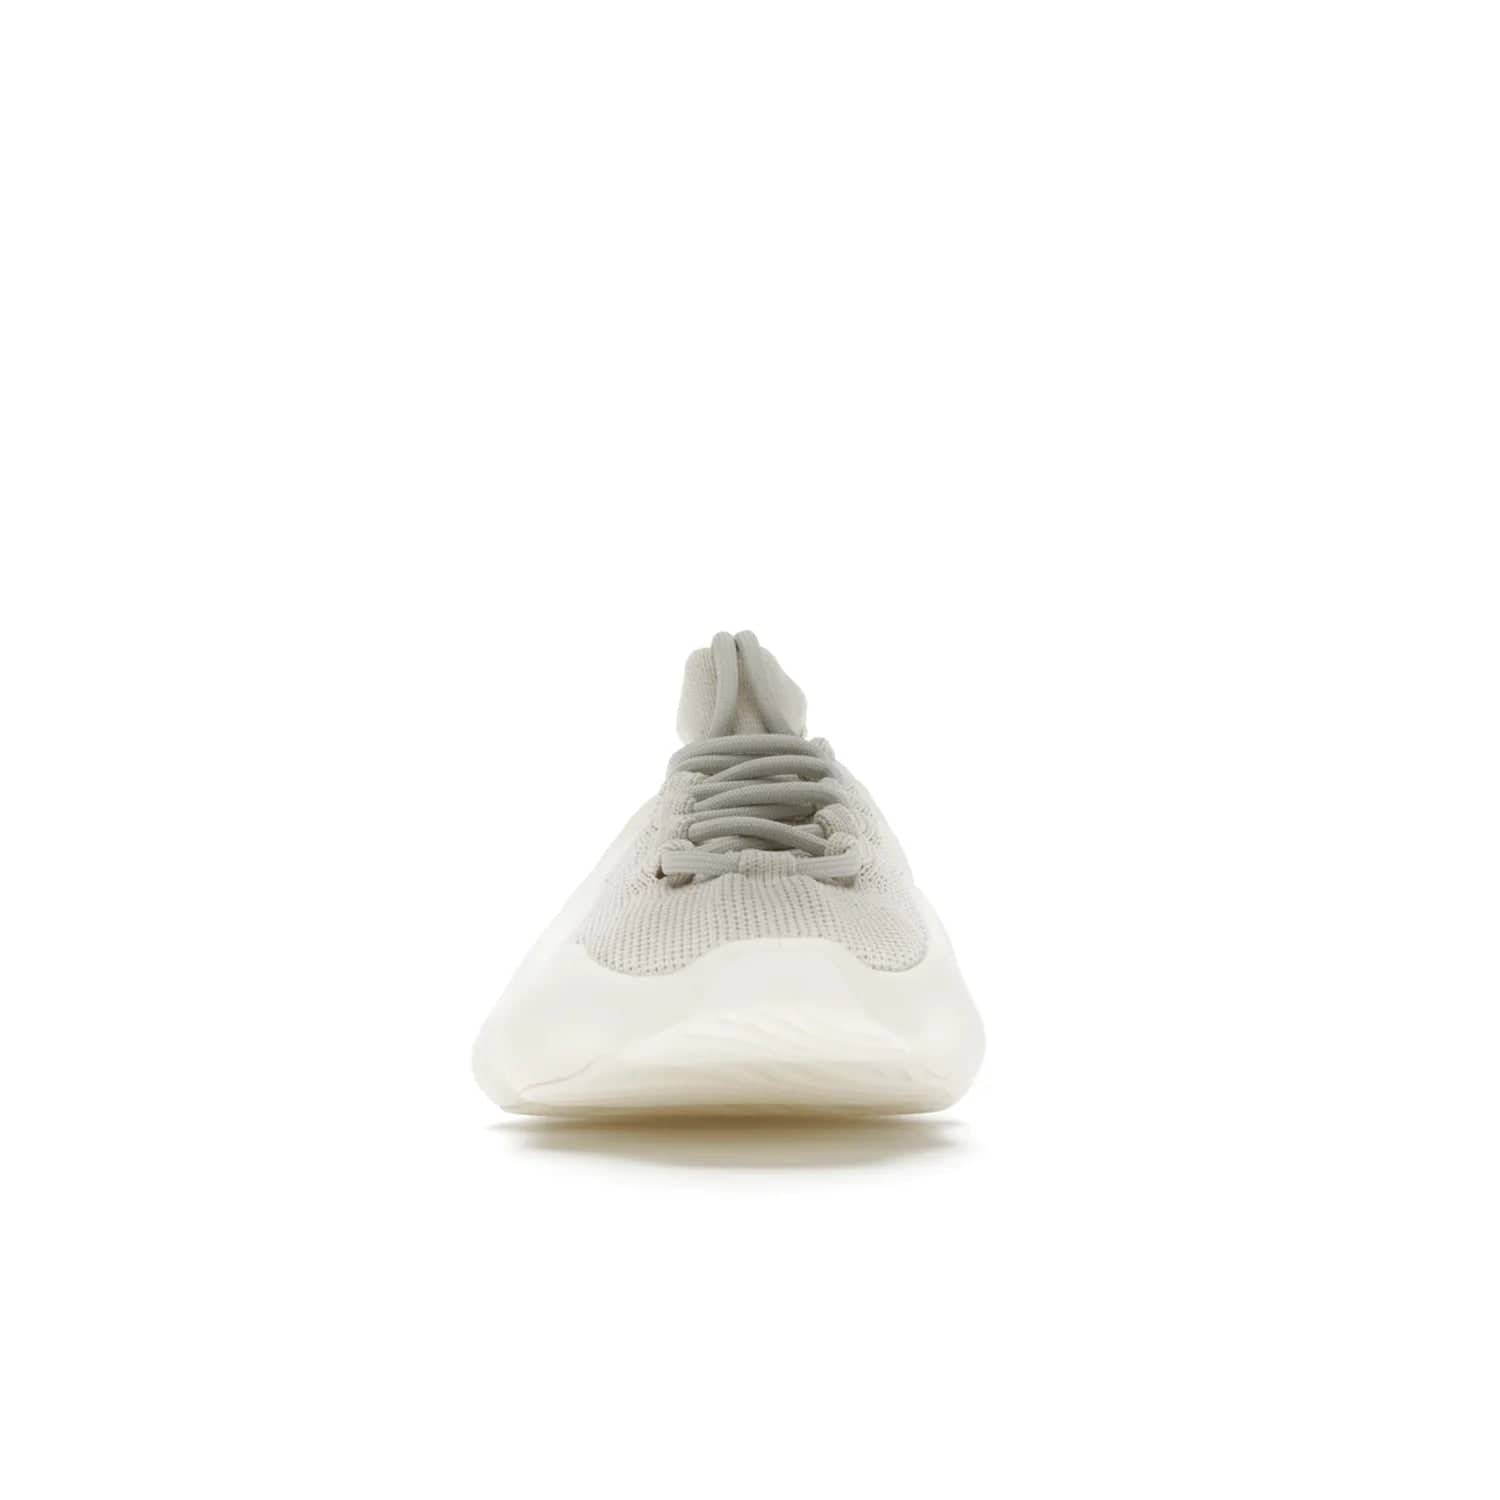 adidas Yeezy 450 Cloud White - Image 10 - Only at www.BallersClubKickz.com - Experience the future with the adidas Yeezy 450 Cloud White. A two-piece design featuring an extreme foam sole and mesh upper, this silhouette is expected to release in March 2021. Get your hands on this striking Cloud White/Cloud White colorway and stand out in the crowd.